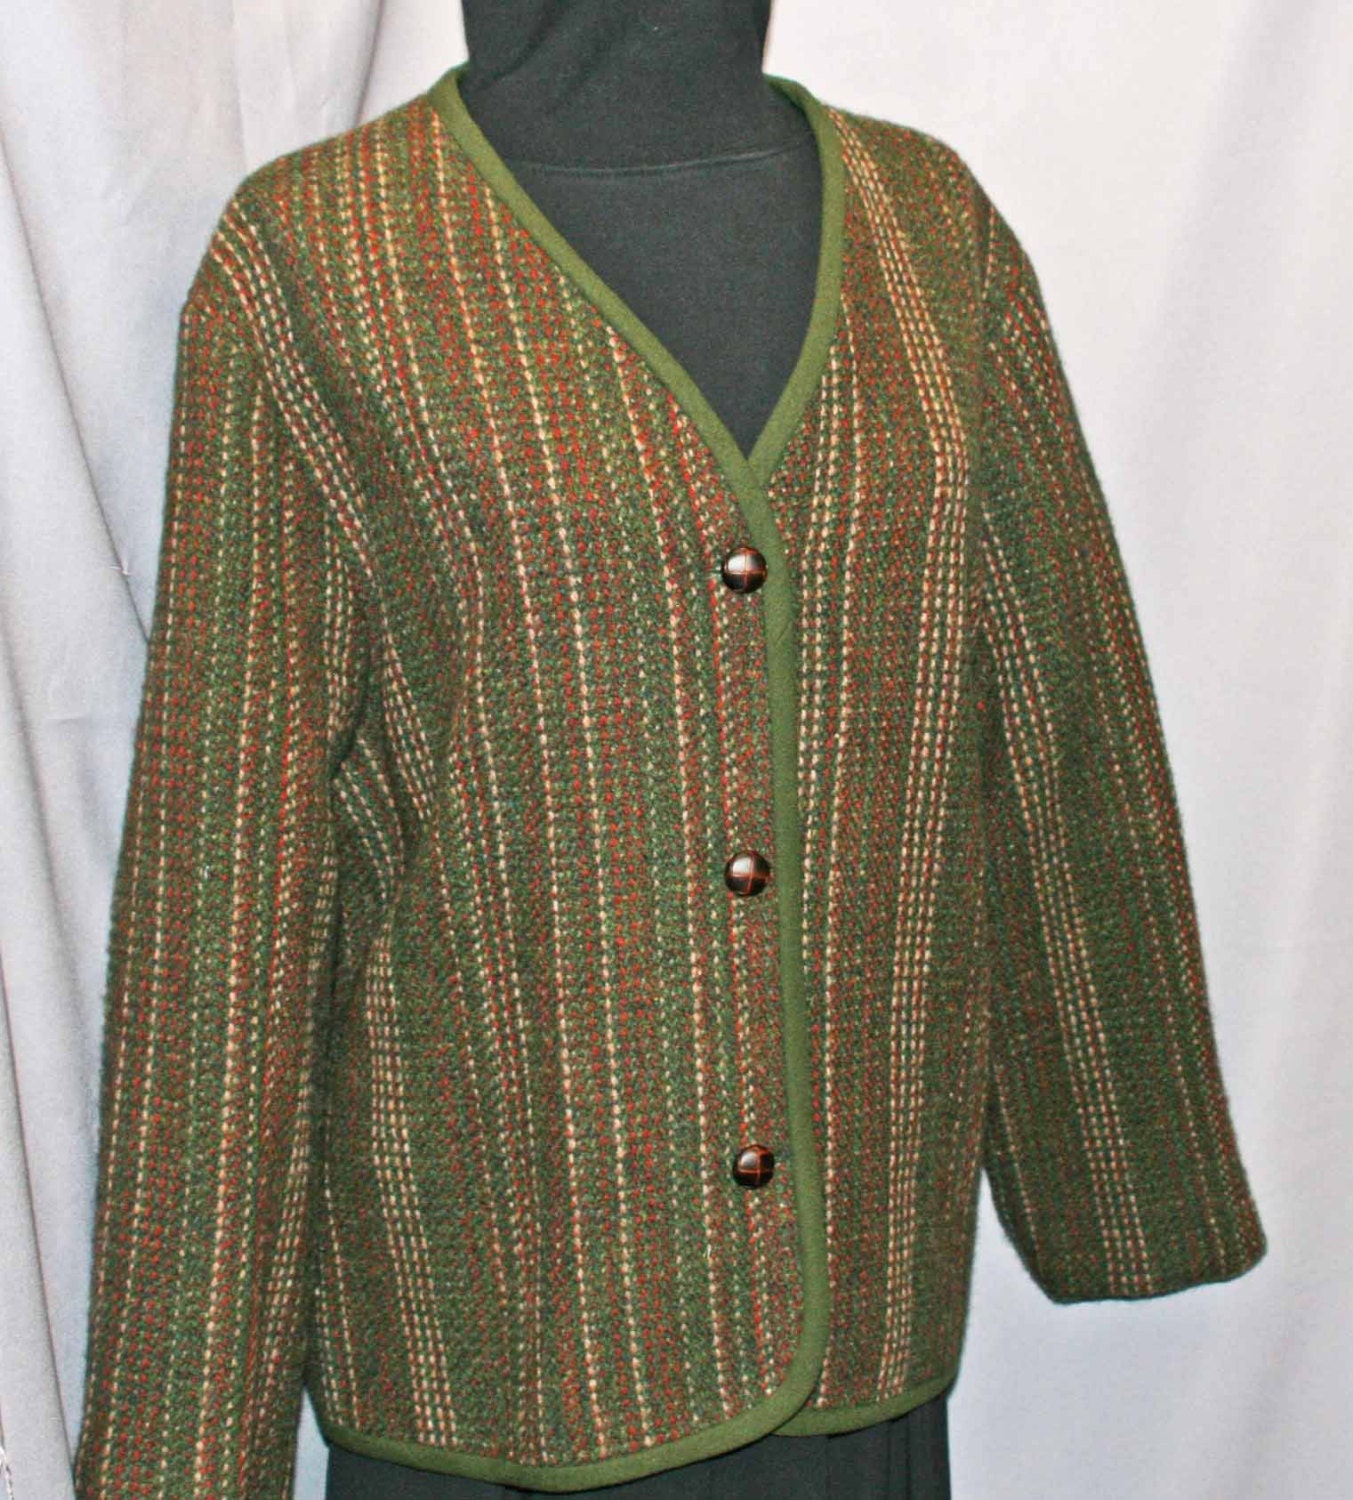 Wool hand woven jacket autumn brown green by countryweaverdesigns